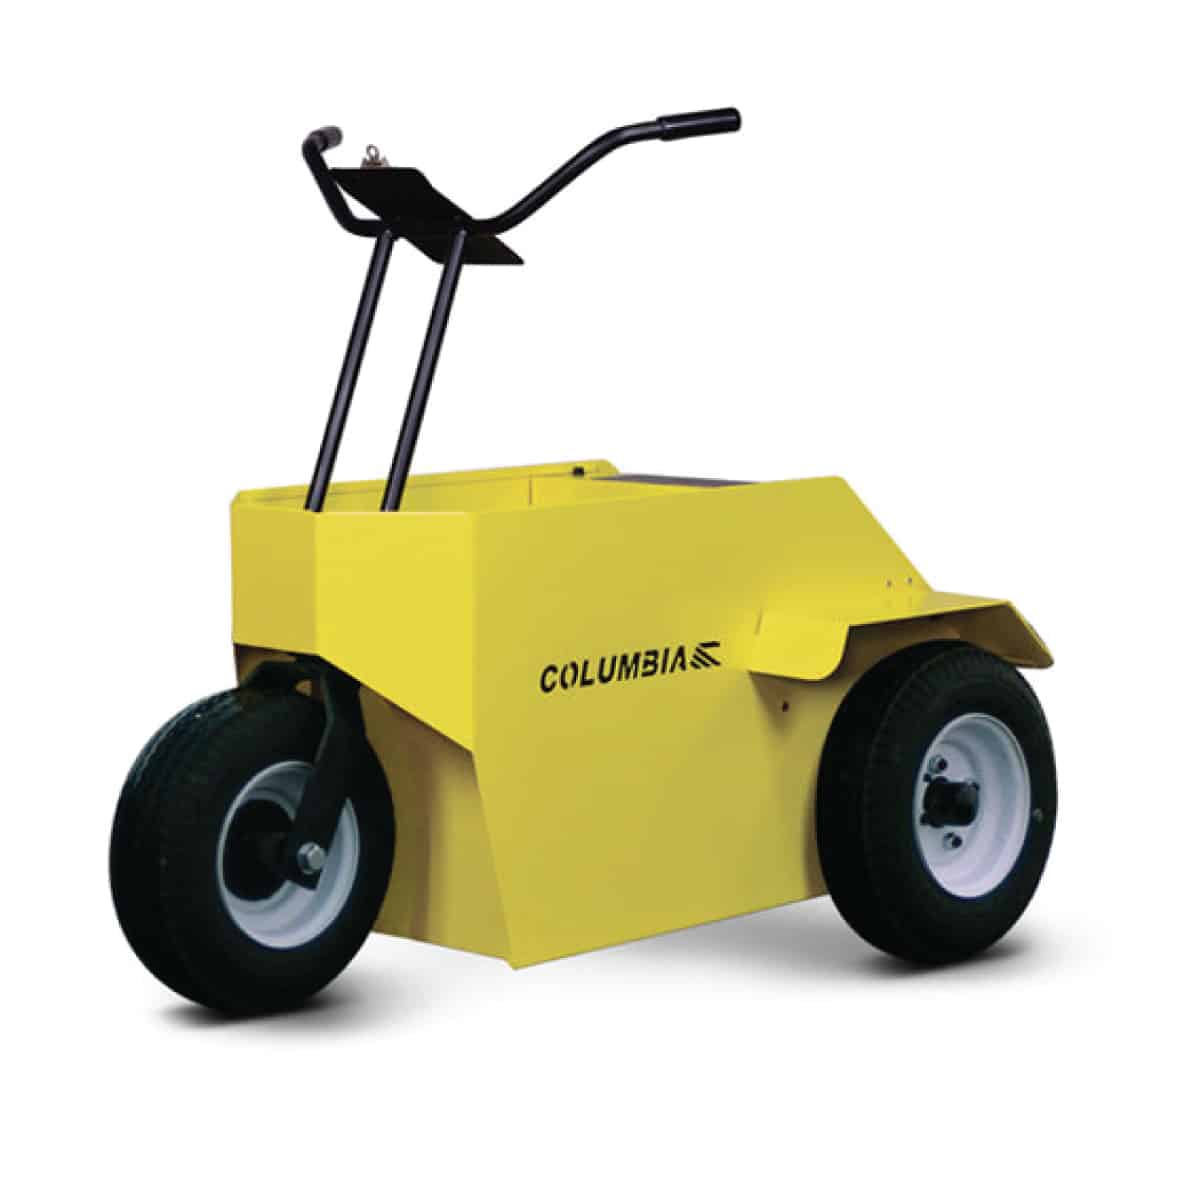 Columbia’s Chariot CR10 Utility Vehicle Total Warehouse